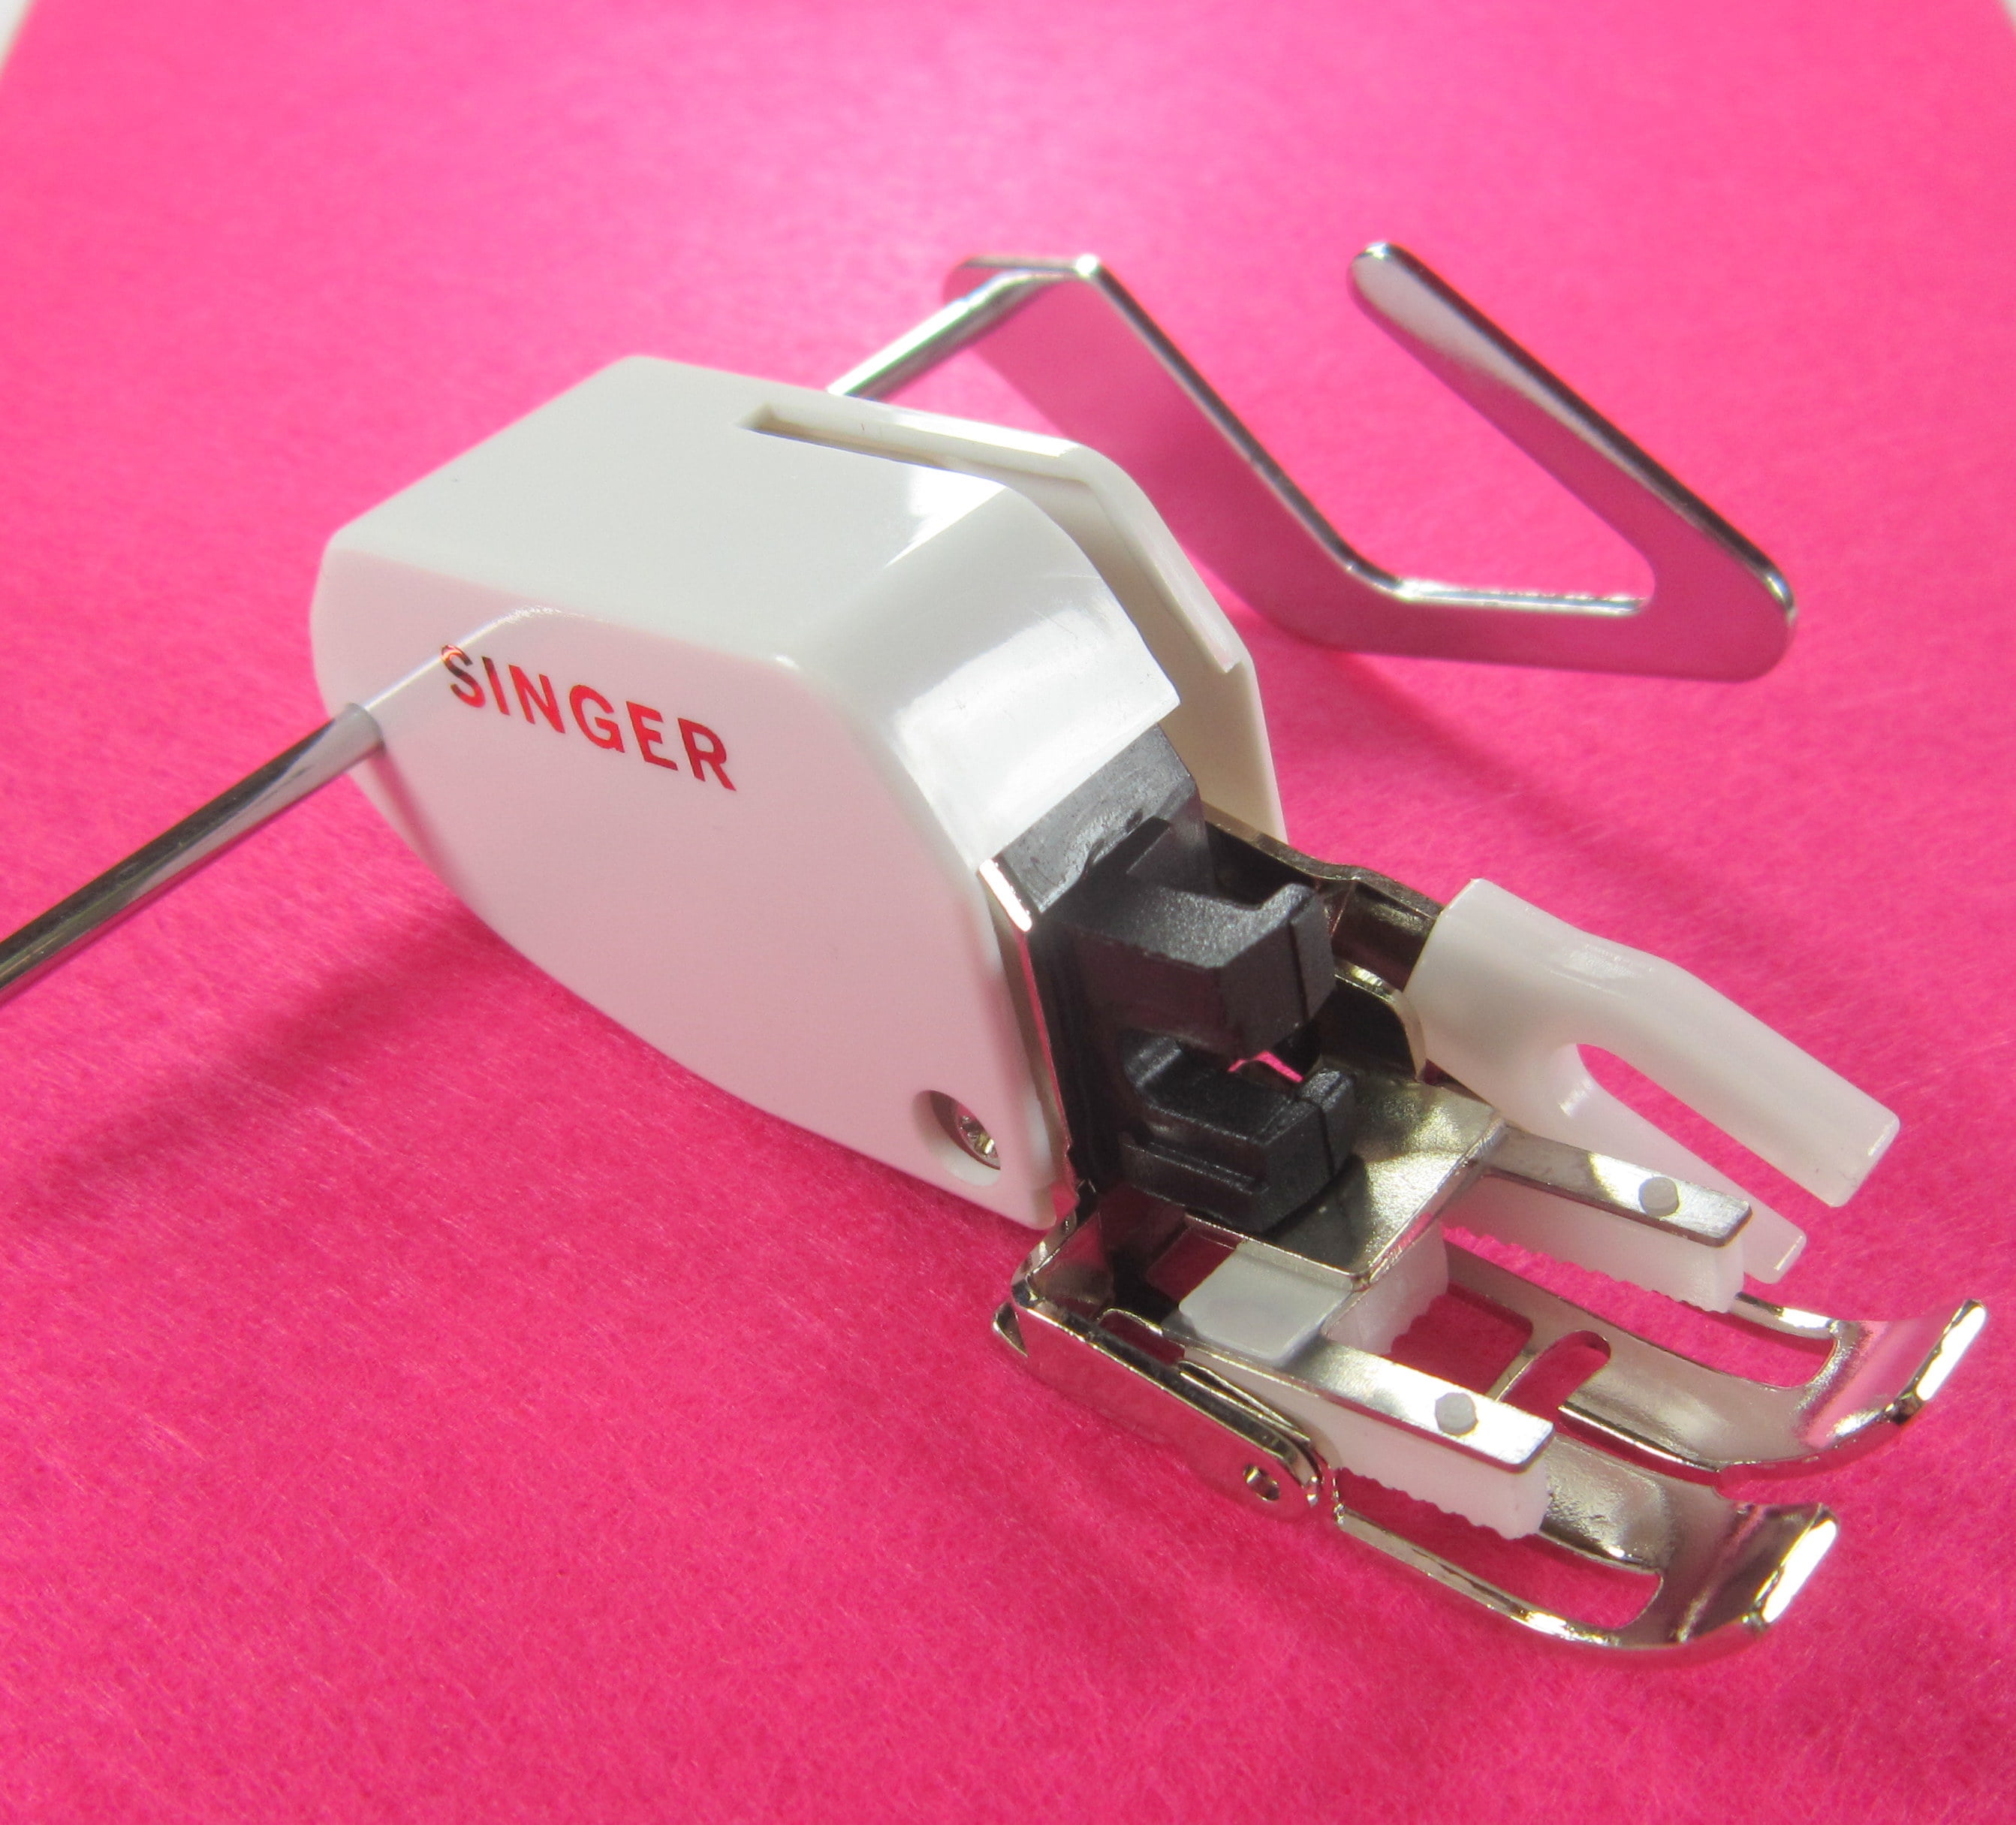 Singer Darning/Embroidery Foot 416127401 - 1000's of Parts